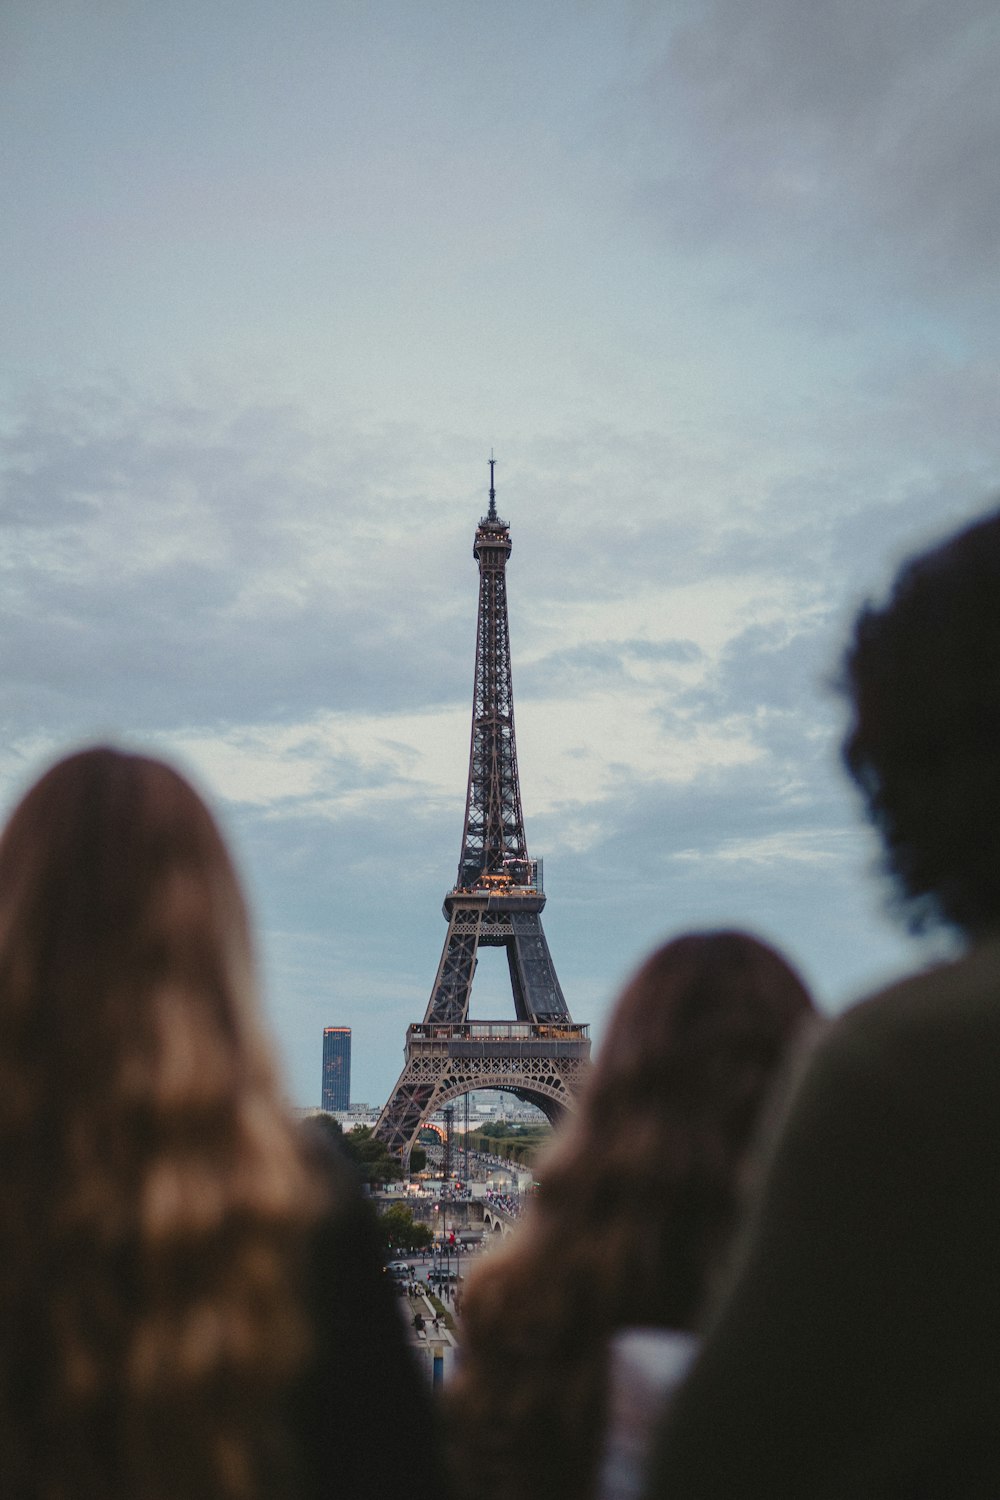 a group of people looking at the eiffel tower